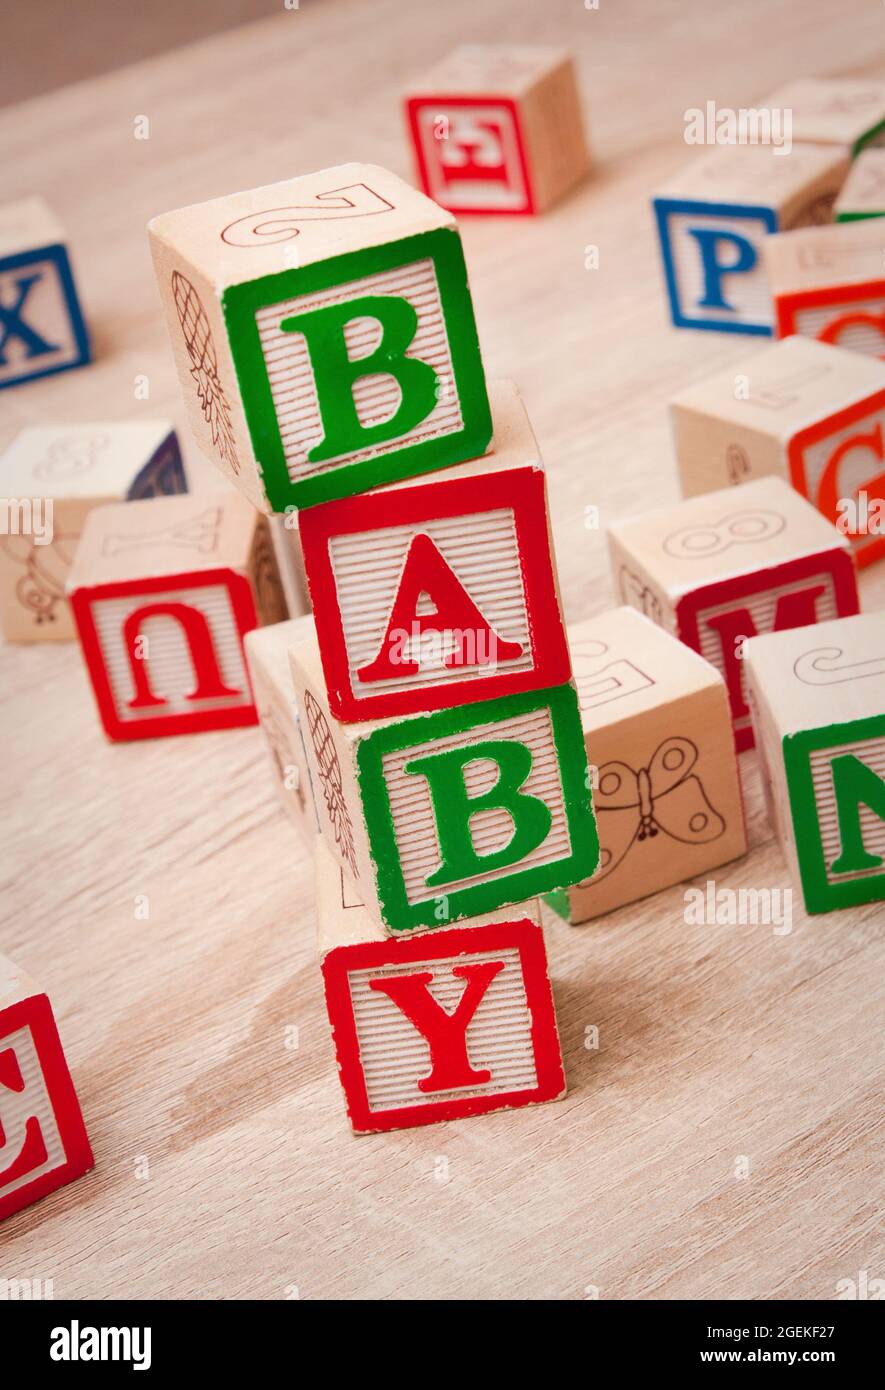 Toy blocks spelling out 'BABY' Stock Photo